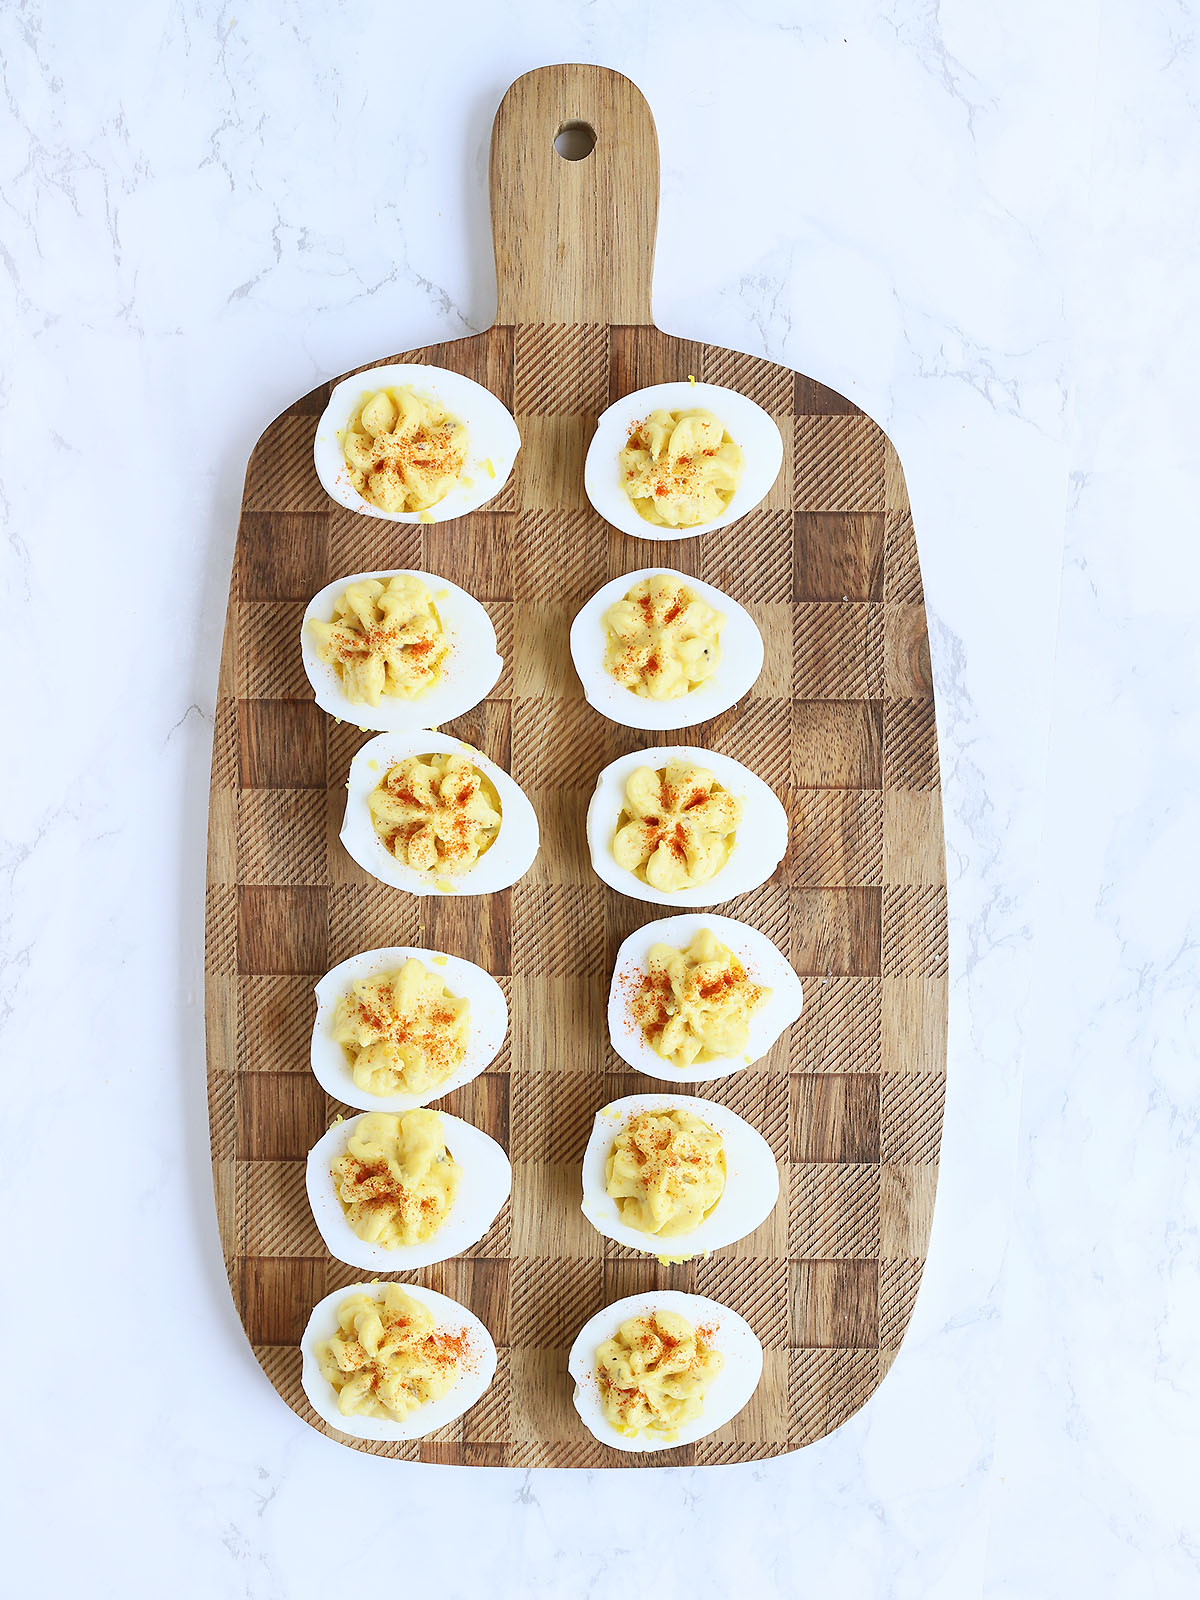 Six deviled eggs garnished with paprika on a serving board.